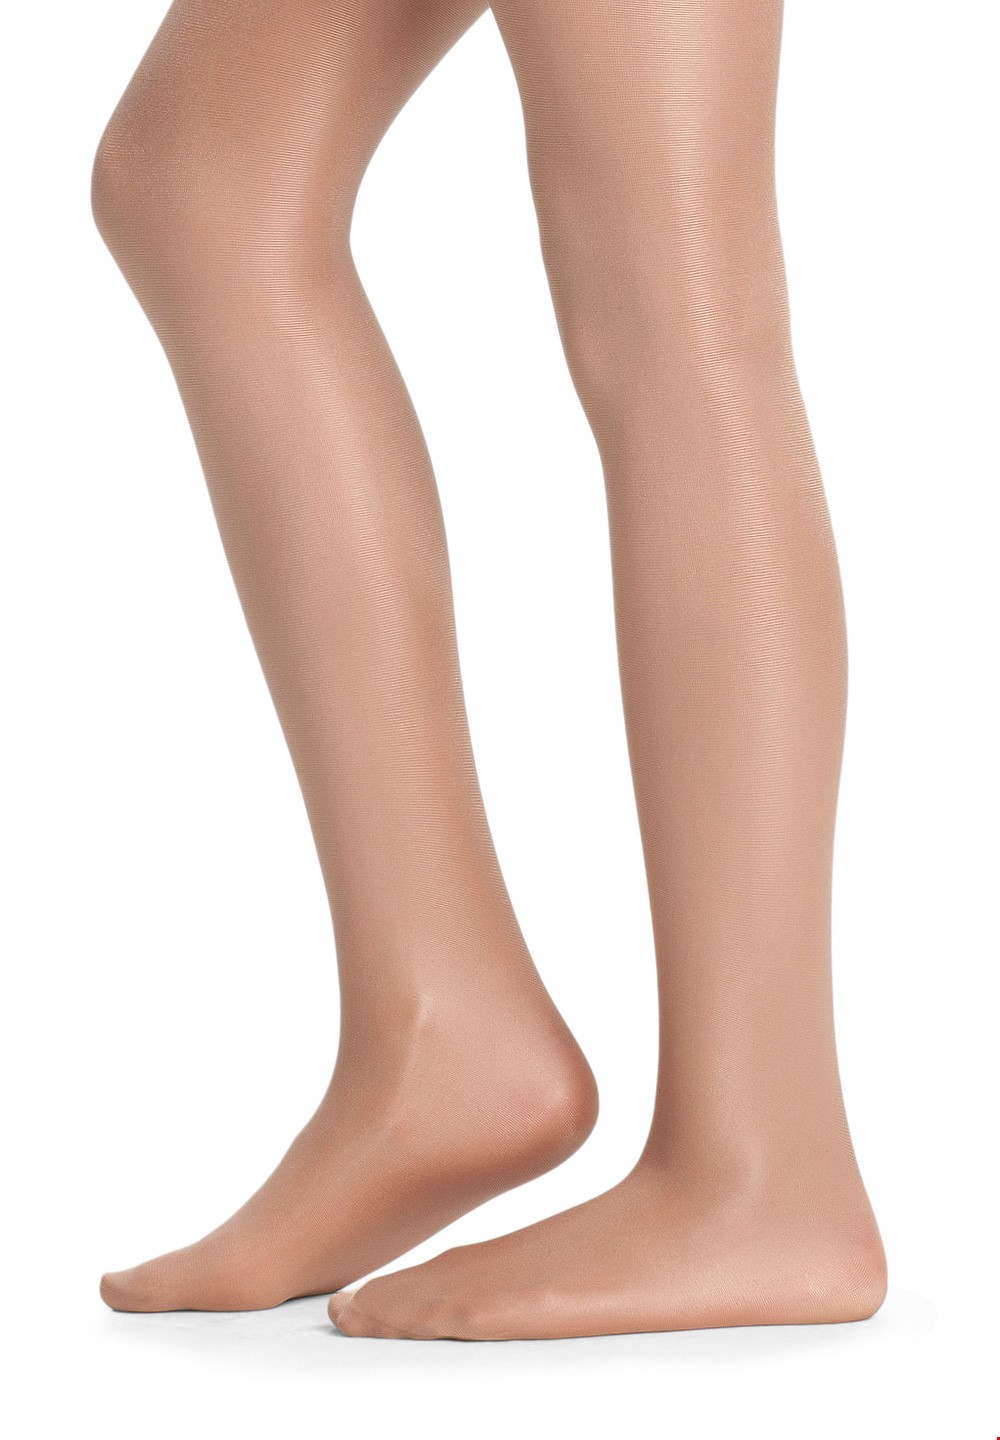 – Tights Girls | Tights Footed Shimmery Dance Tights Children Danskin Ultra